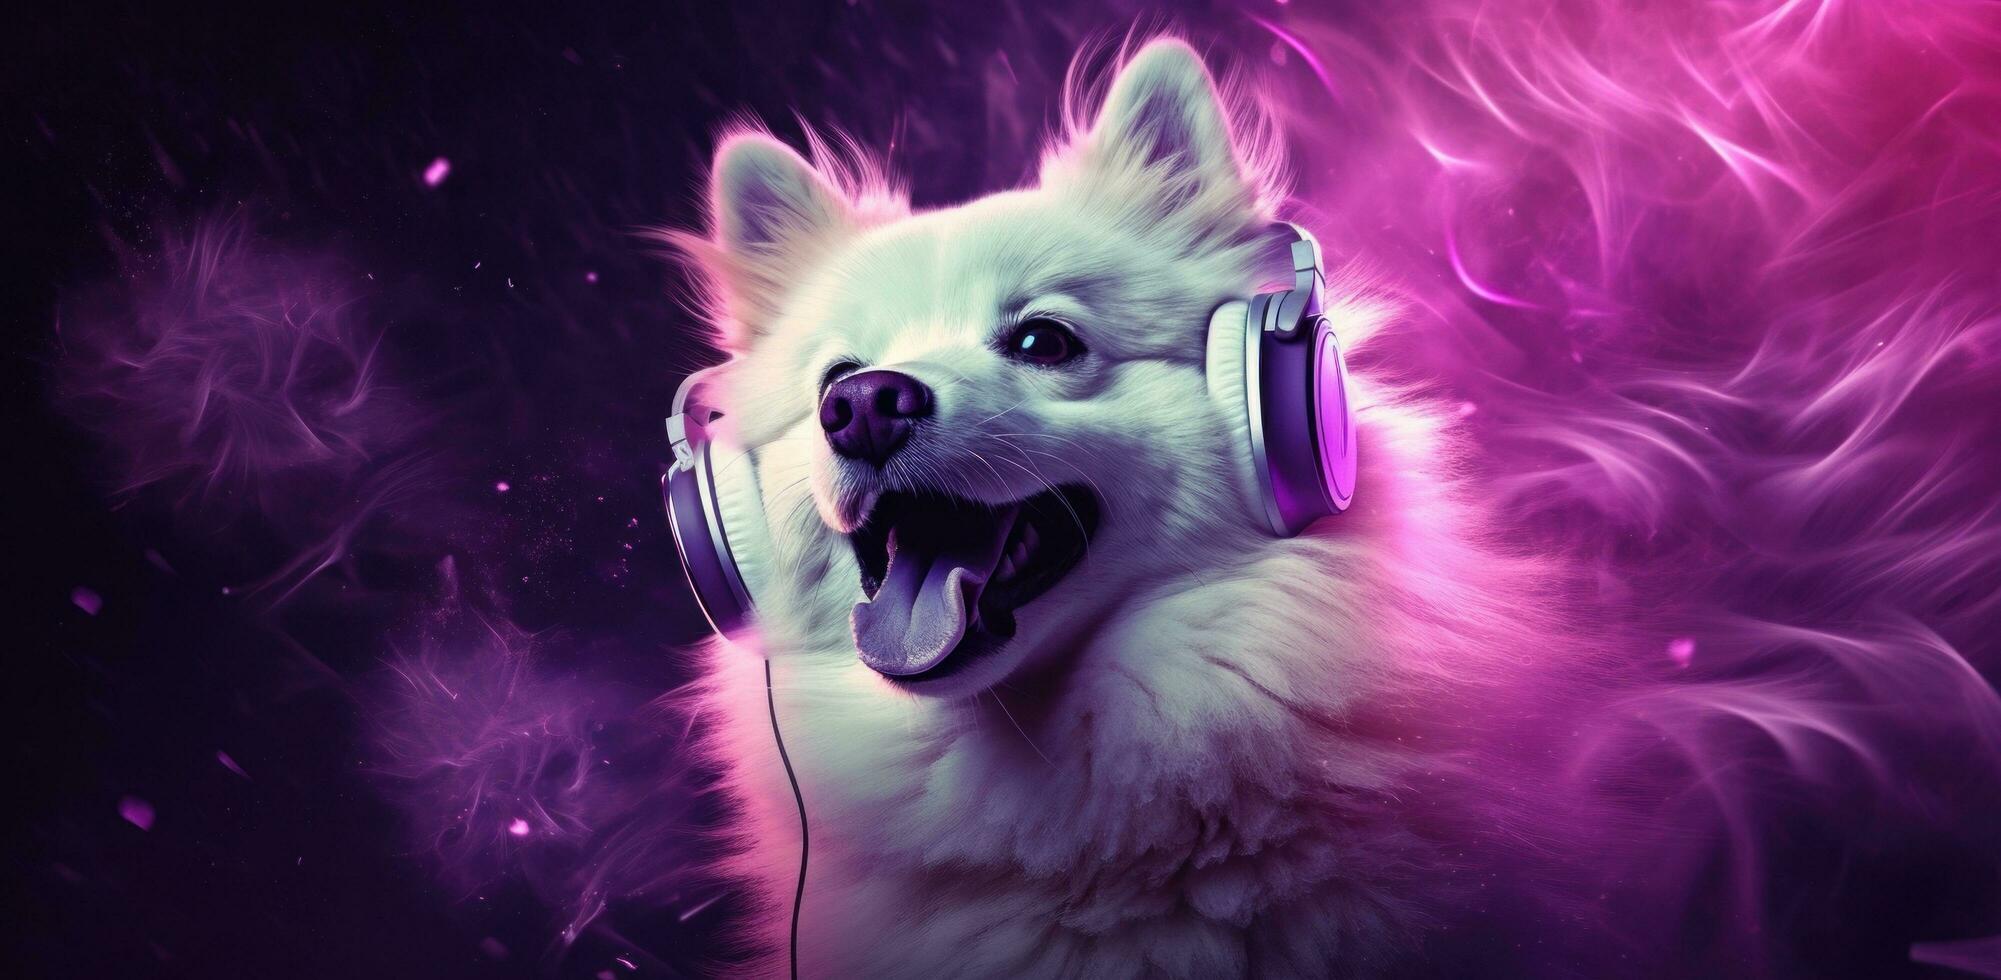 AI generated the dog is listening to music and has a purple headphone photo